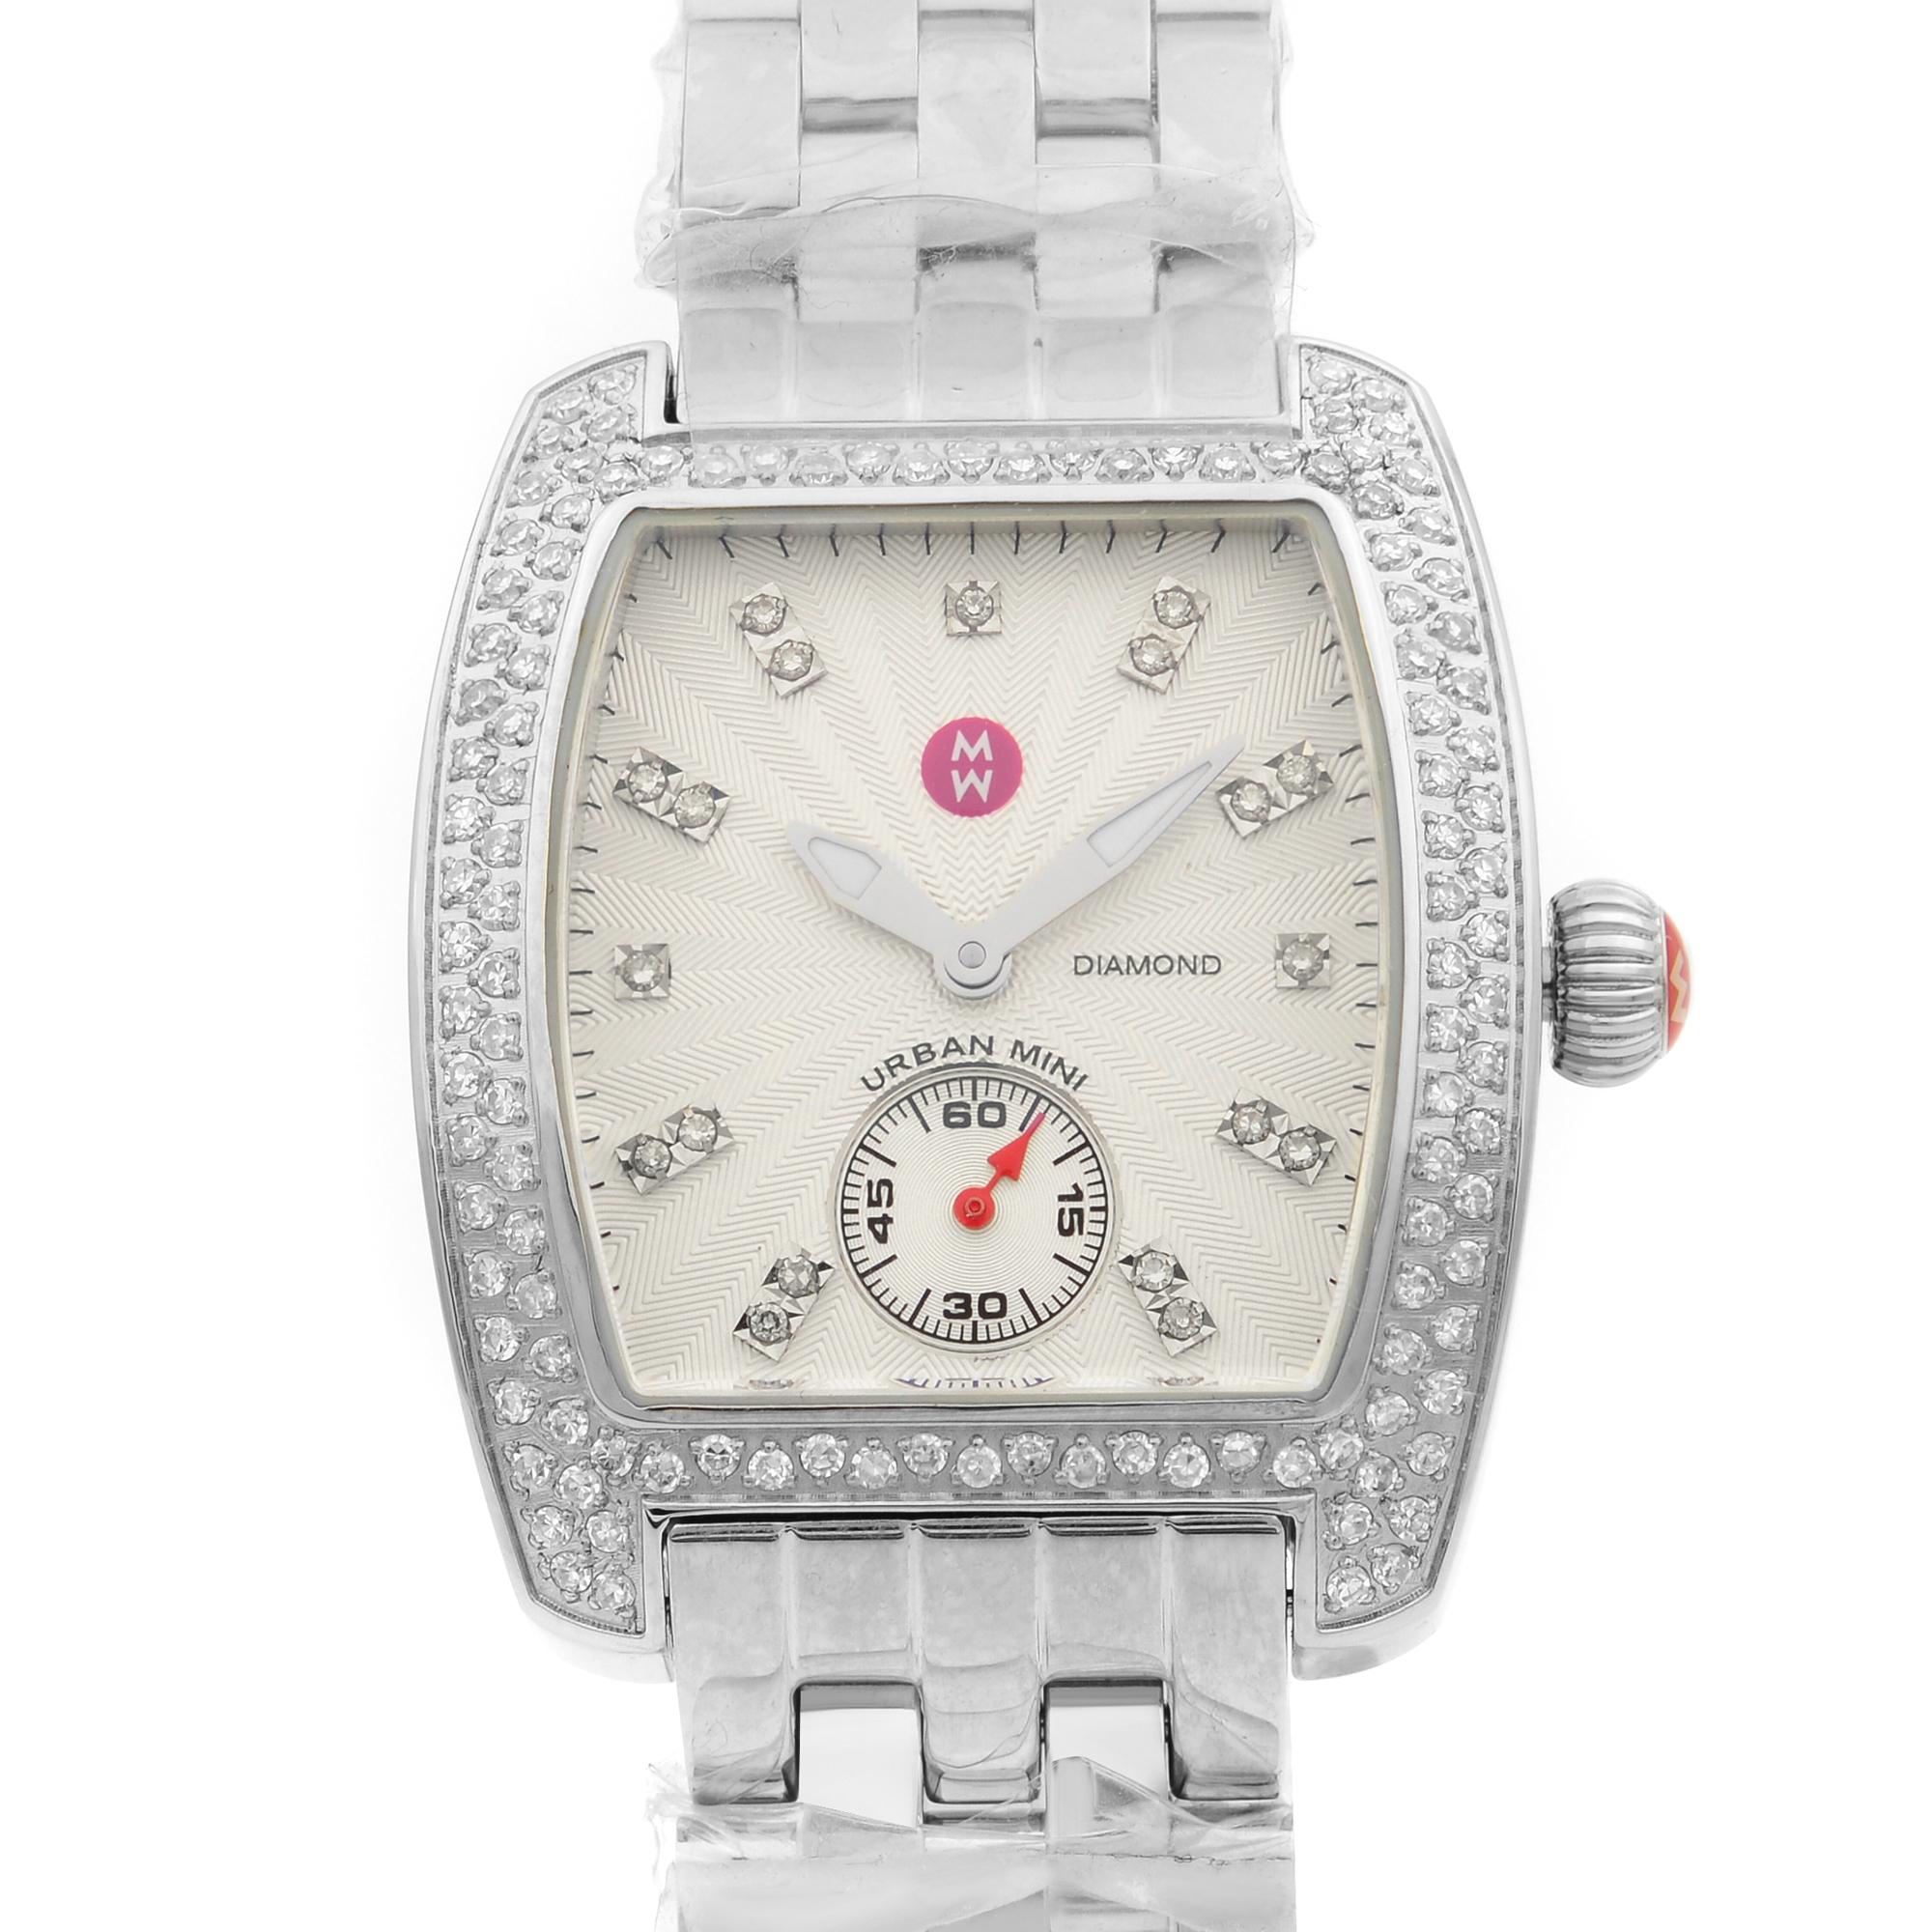 This New Without Tags Michele Urban MWW02A000508 is a beautiful Ladie's timepiece that is powered by quartz (battery) movement which is cased in a stainless steel case. It has a tonneau shape face, small seconds subdial dial, and has hand diamonds